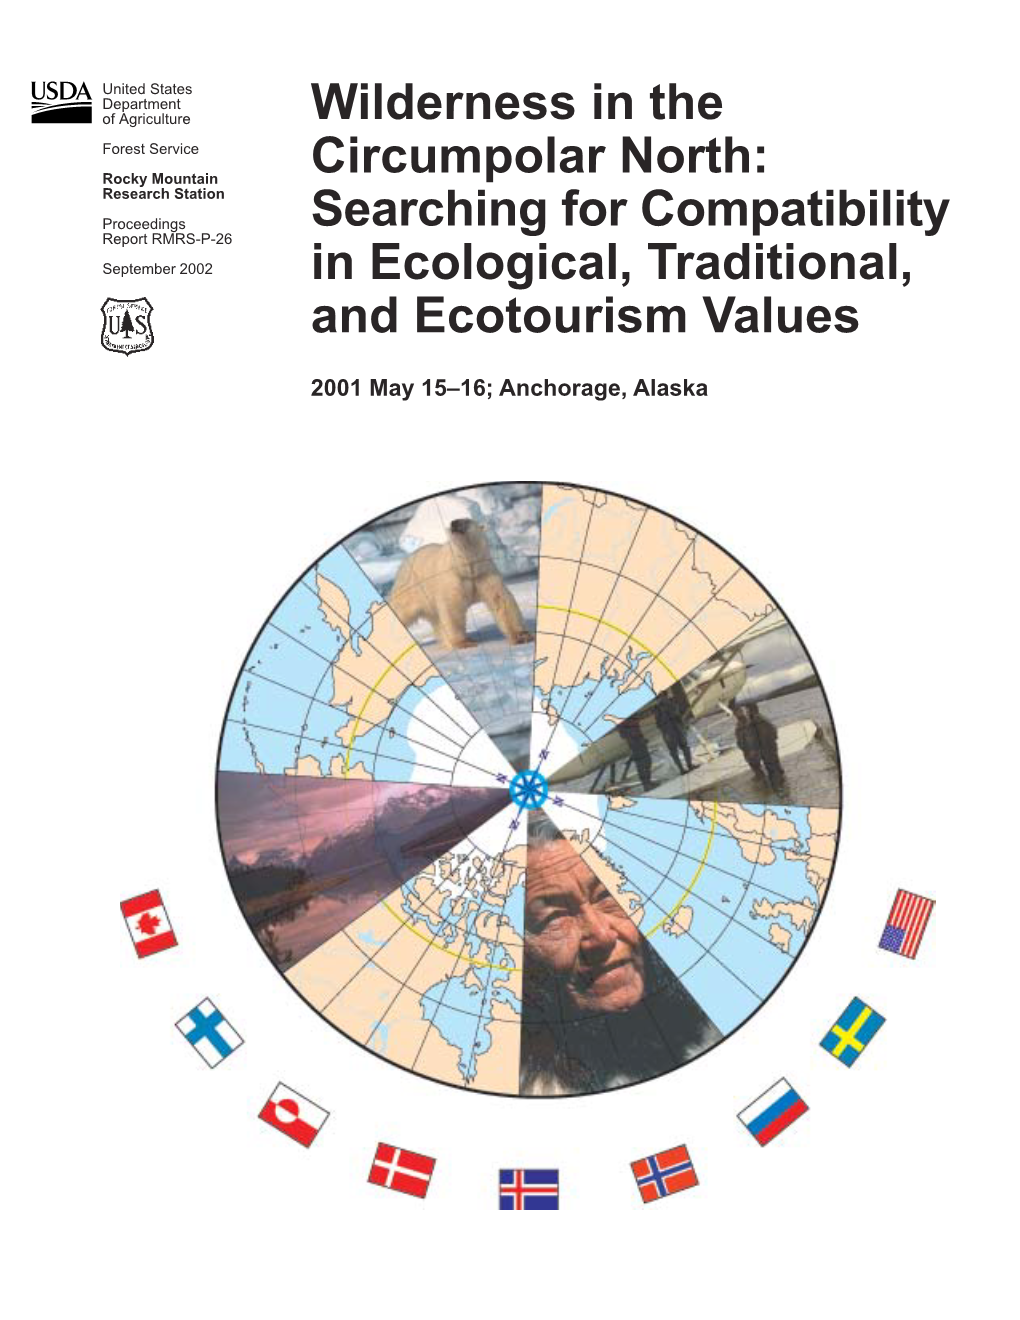 Wilderness in the Circumpolar North: Searching for Compatibility in Ecological, Traditional, and Ecotourism Values; 2001 May 15–16; Anchorage, AK